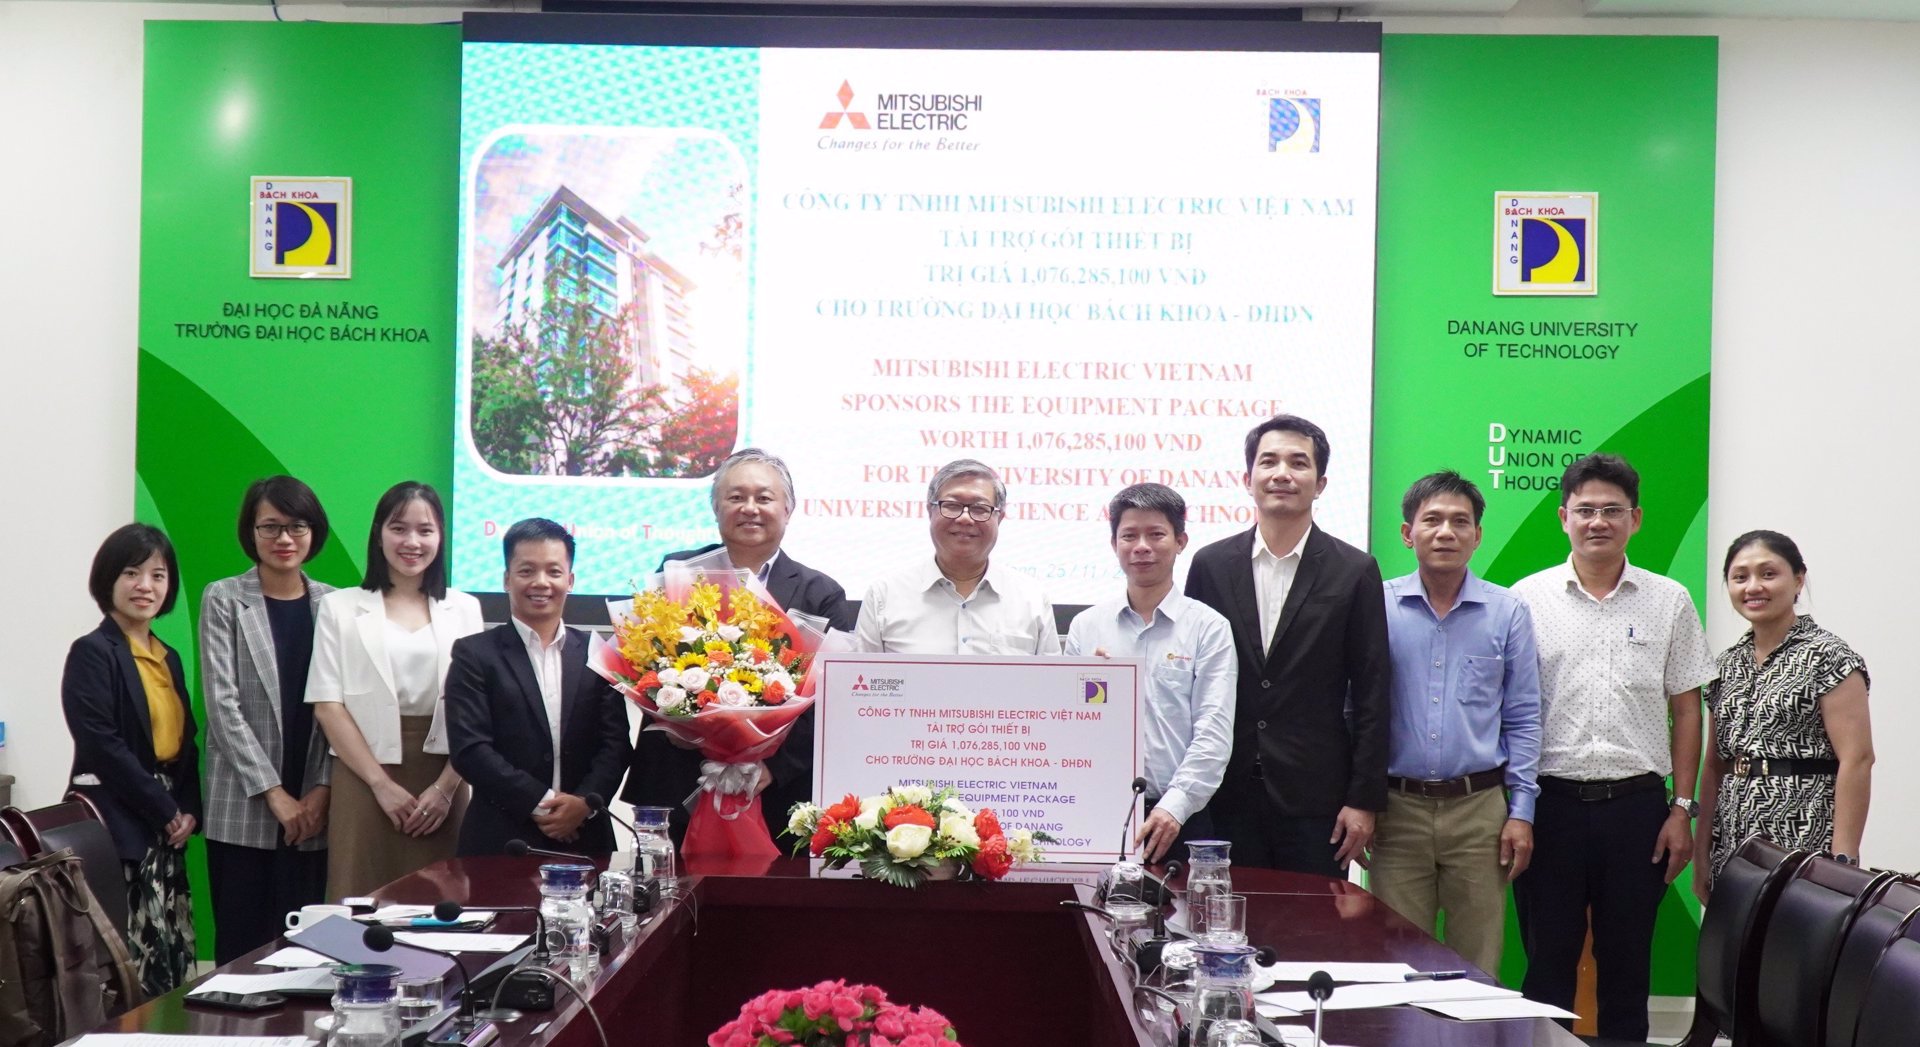 Mitsubishi Electric Vietnam sponsored an equipment package worth 1 billion VND for the University of Danang – University of Science and Technology